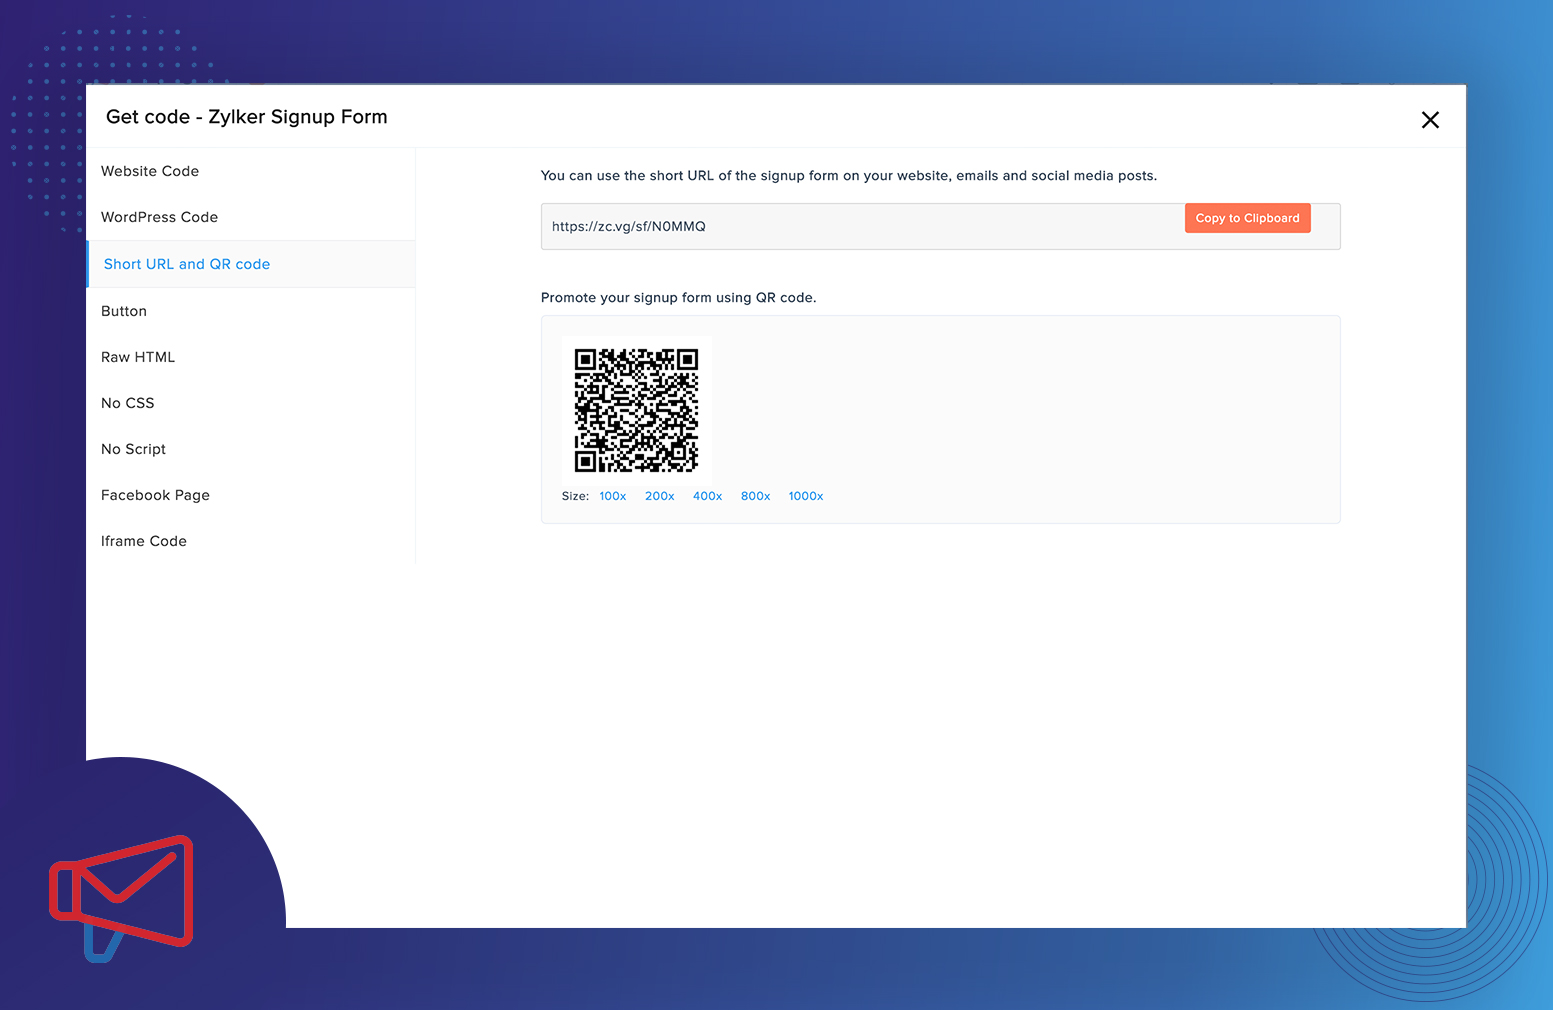 Generating QR Code for a sign-up form